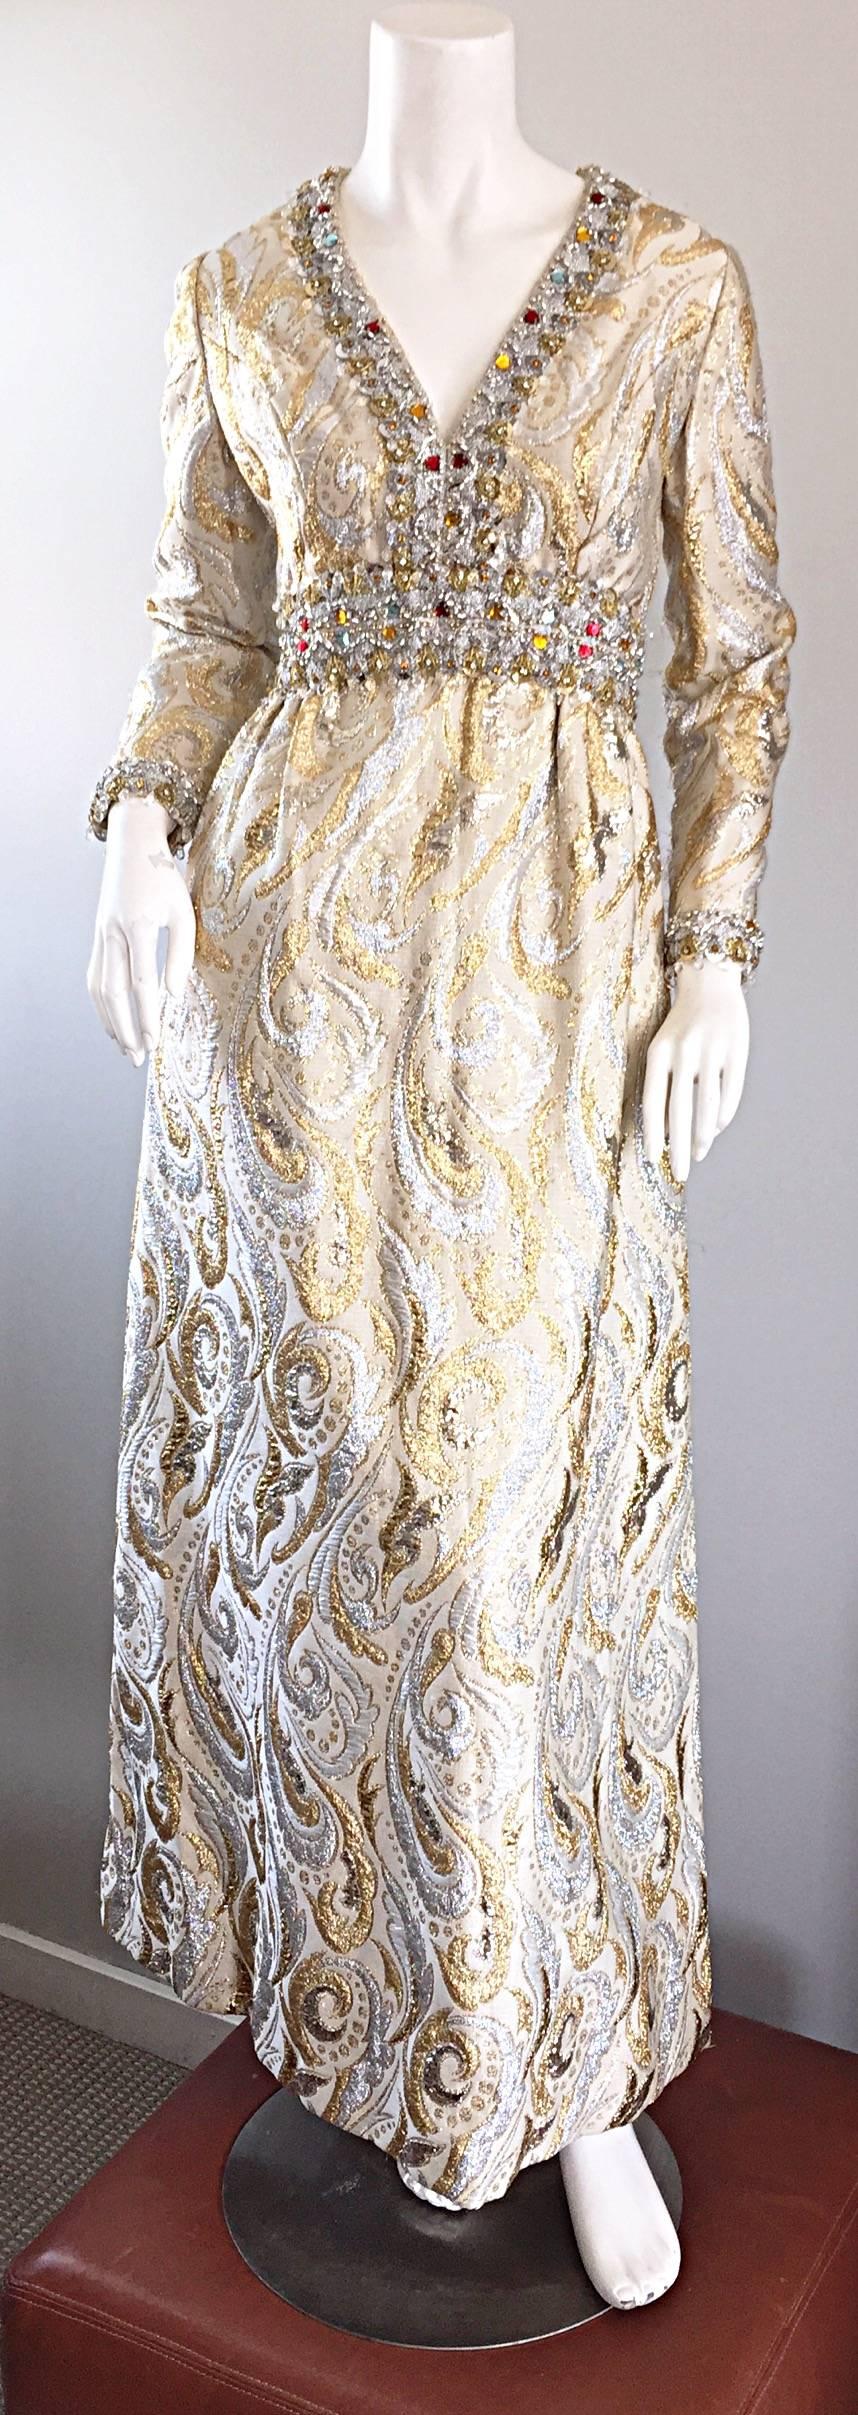 Absolutely stunning vintage 60s KENT ORIGINALS gold and silver silk brocade crystal and beaded full length evening dress! Intricate couture quality, with quite a bit of hand-sewn workmanship. Colorful crystals embellished at the bodice and sleeve